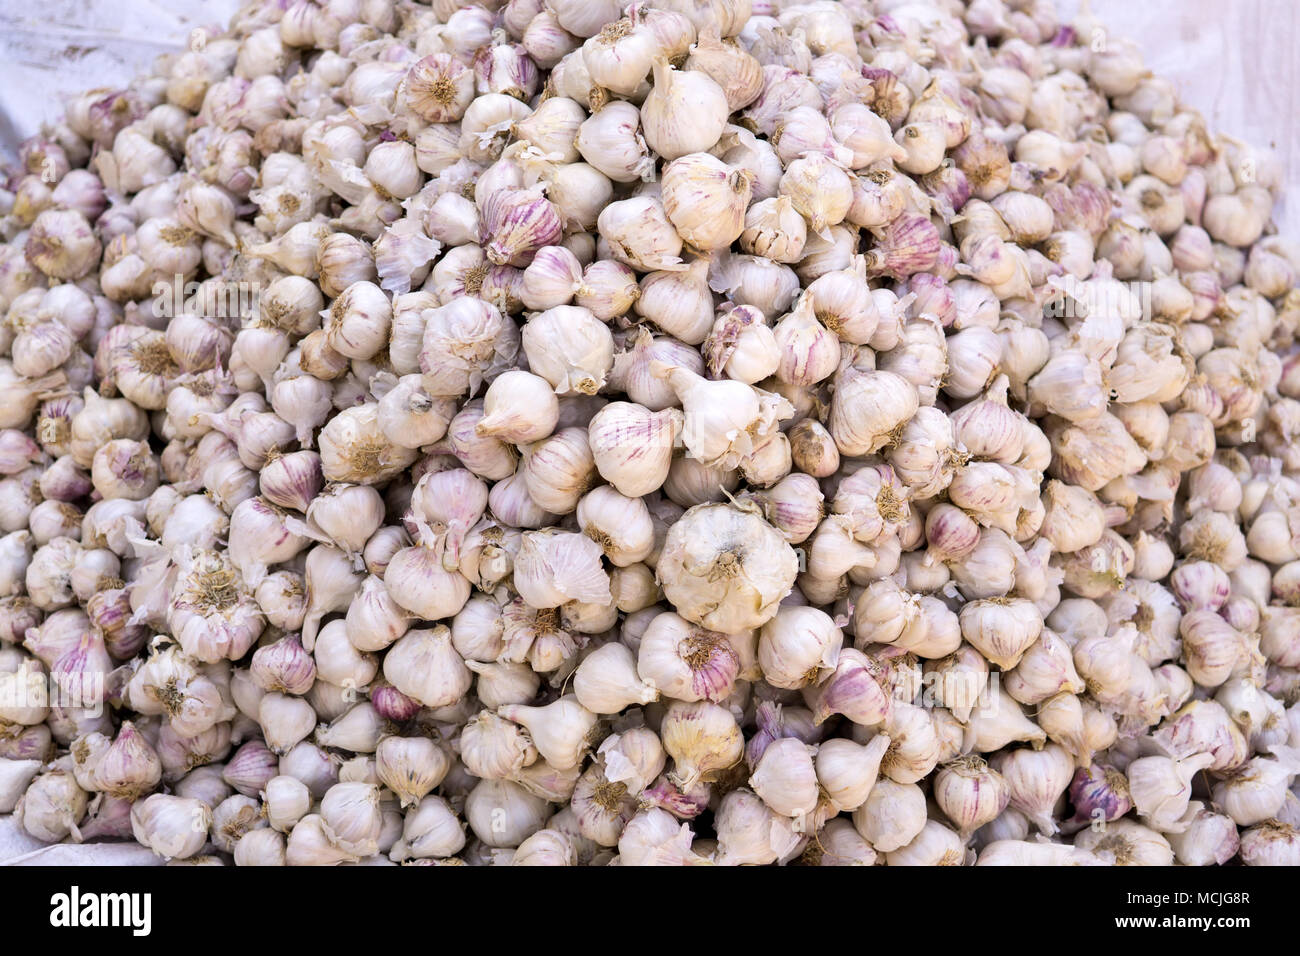 Heaps of Indian garlic sold at Mandawa town in Rajasthan state of India Stock Photo